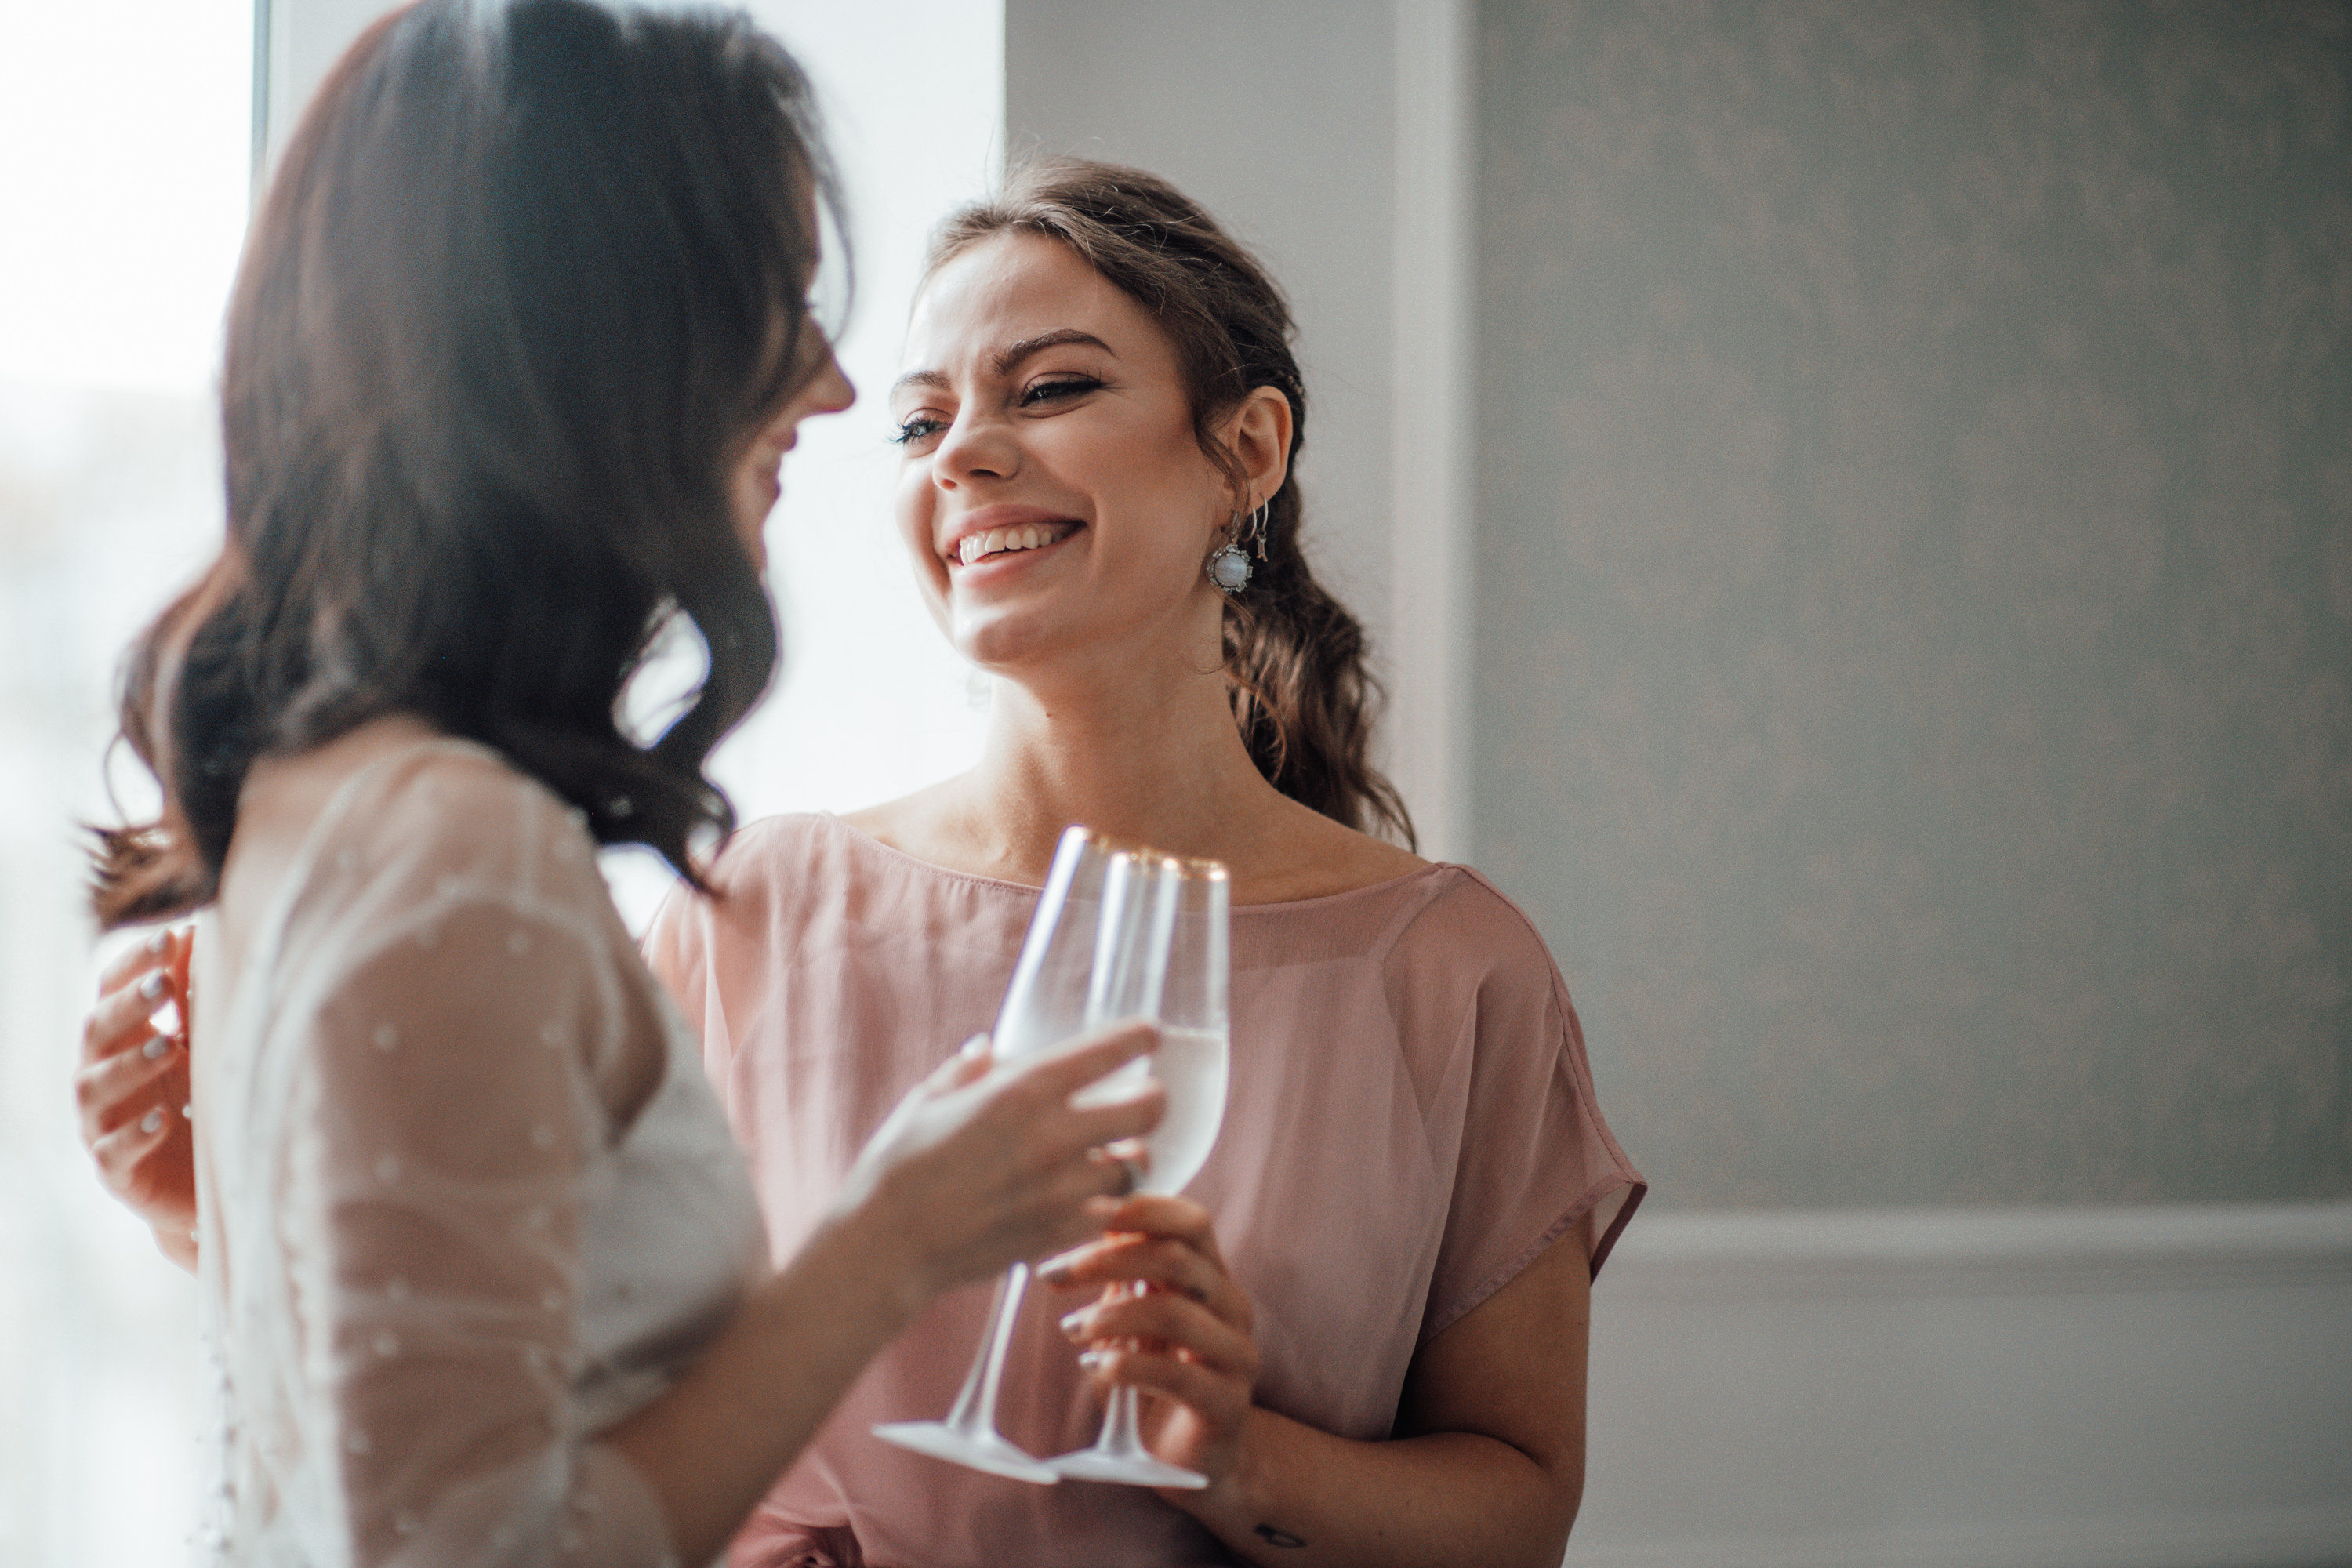 Maid of honor toasts champagne glass with the bride